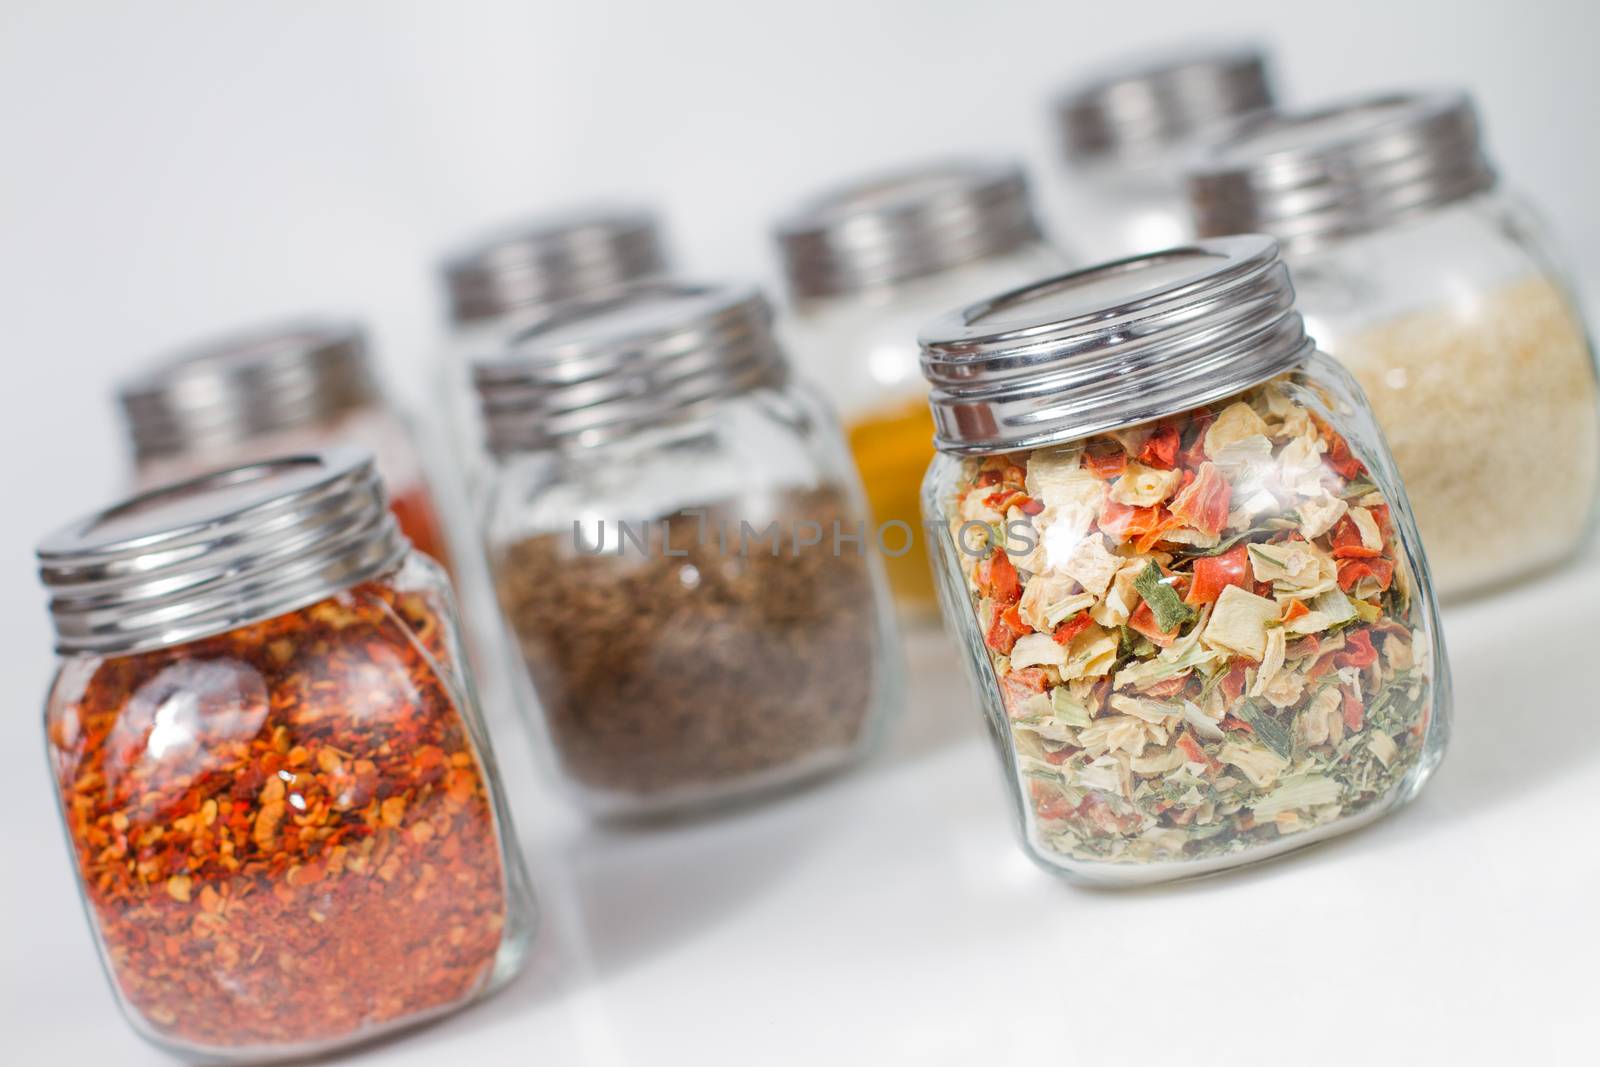 Various Indian spices in glass jars